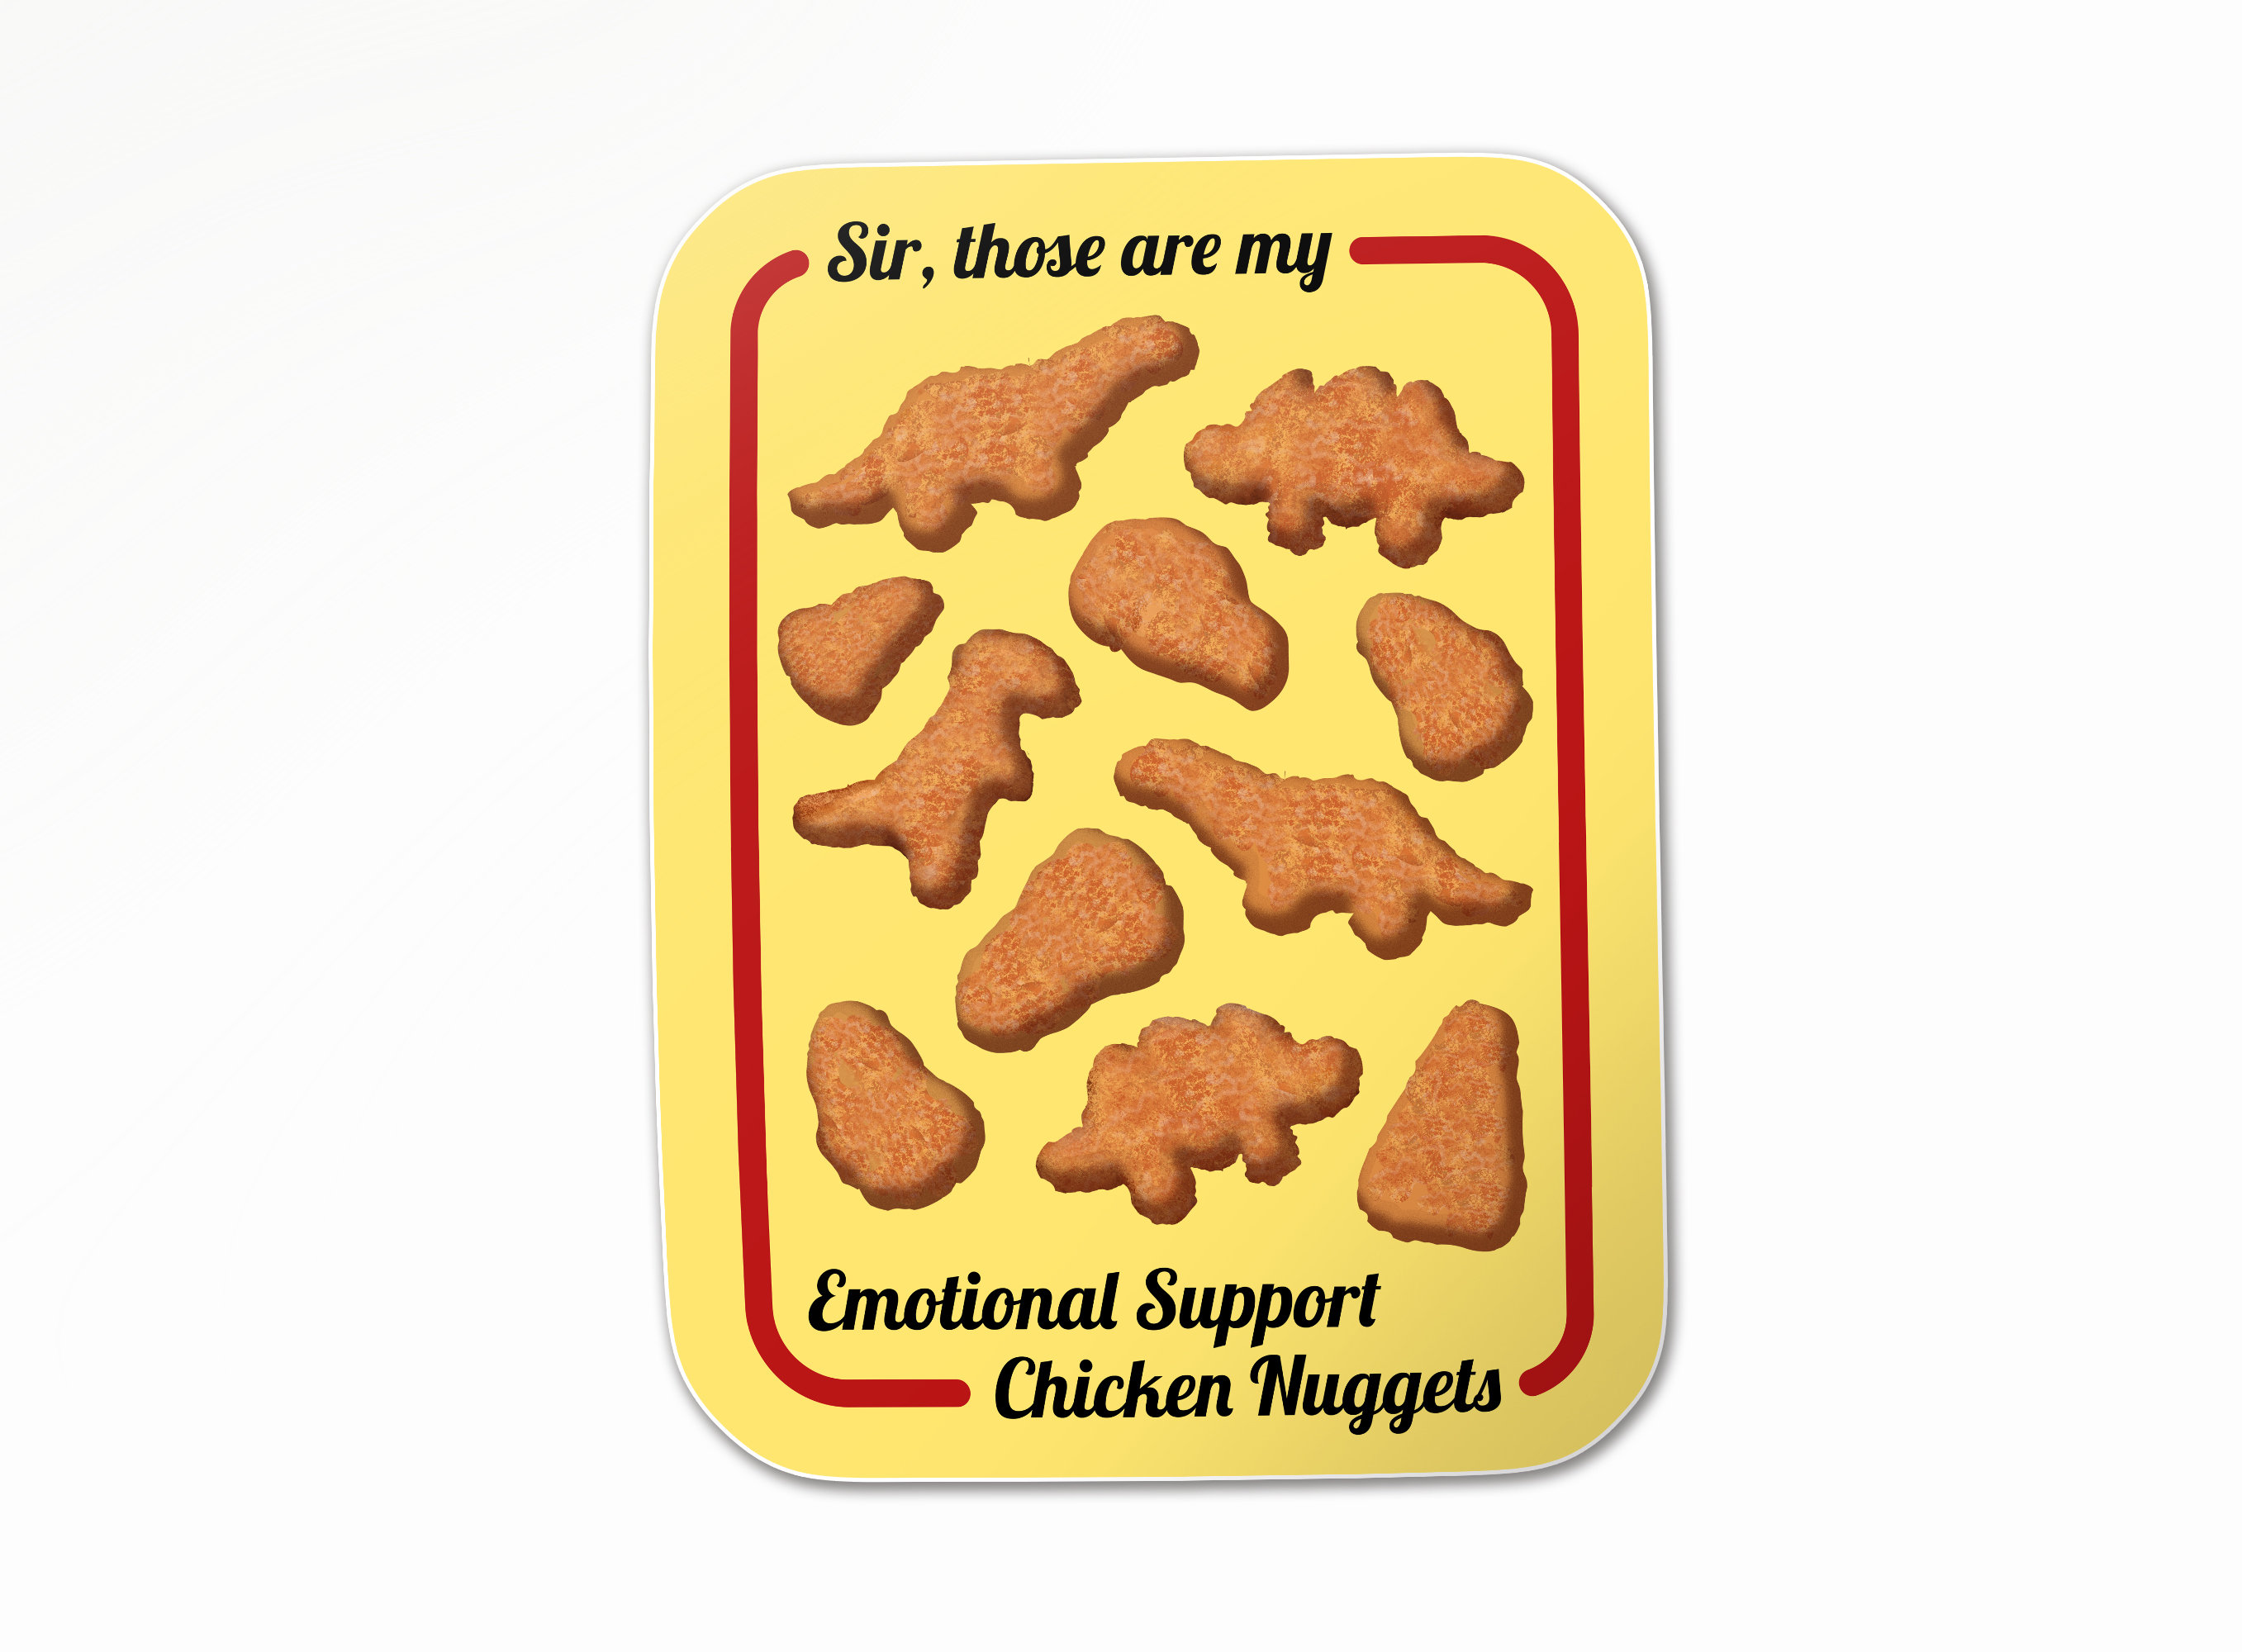 Whether you're craving chicken nuggets or dumplings, @Relatable has al, emotional  support